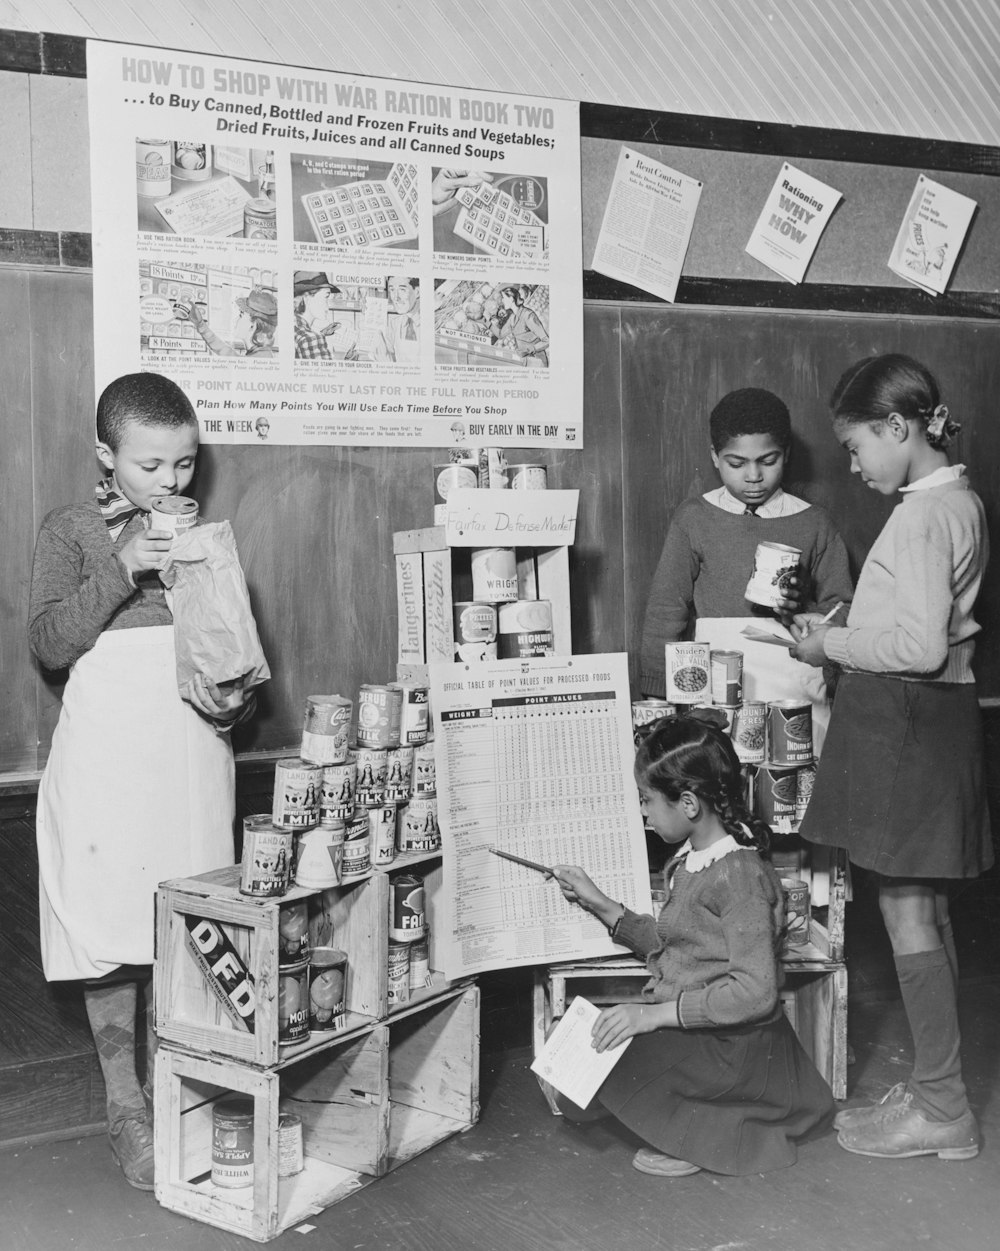 African American children learning about war rationing at school] Summary Photograph shows boys pretending to be grocers and girls pretending to be shoppers at pretend grocery market at school in Washington, D.C.